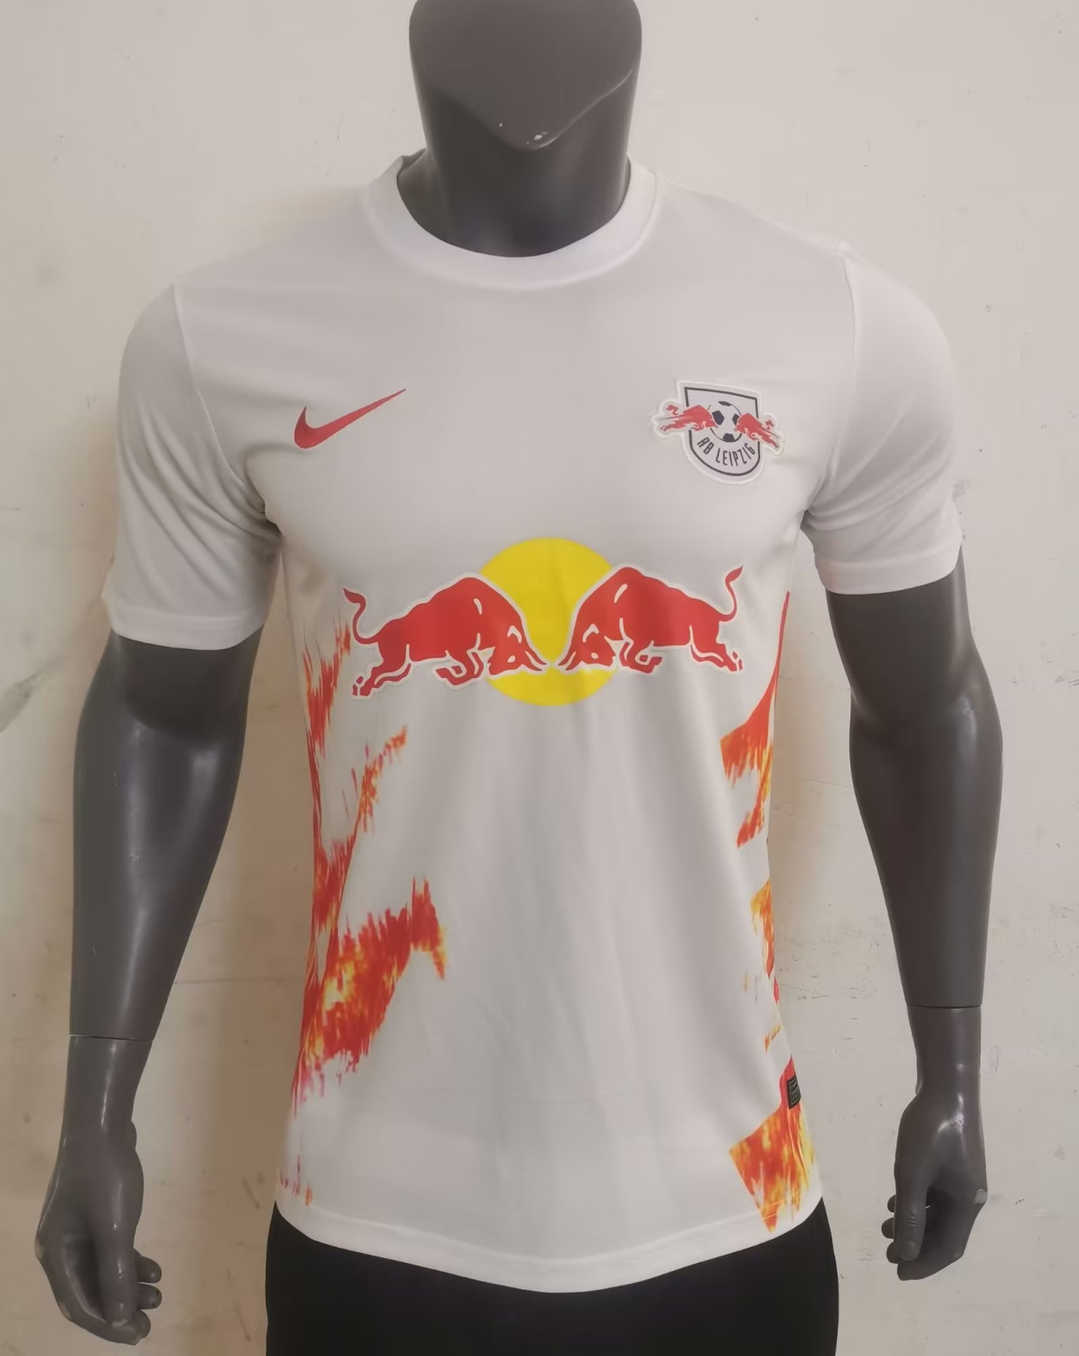 RB Leipzig Leipzig Soccer Jersey Replica on Fire Limited-Edition 2023/24 Mens (Special Edition)